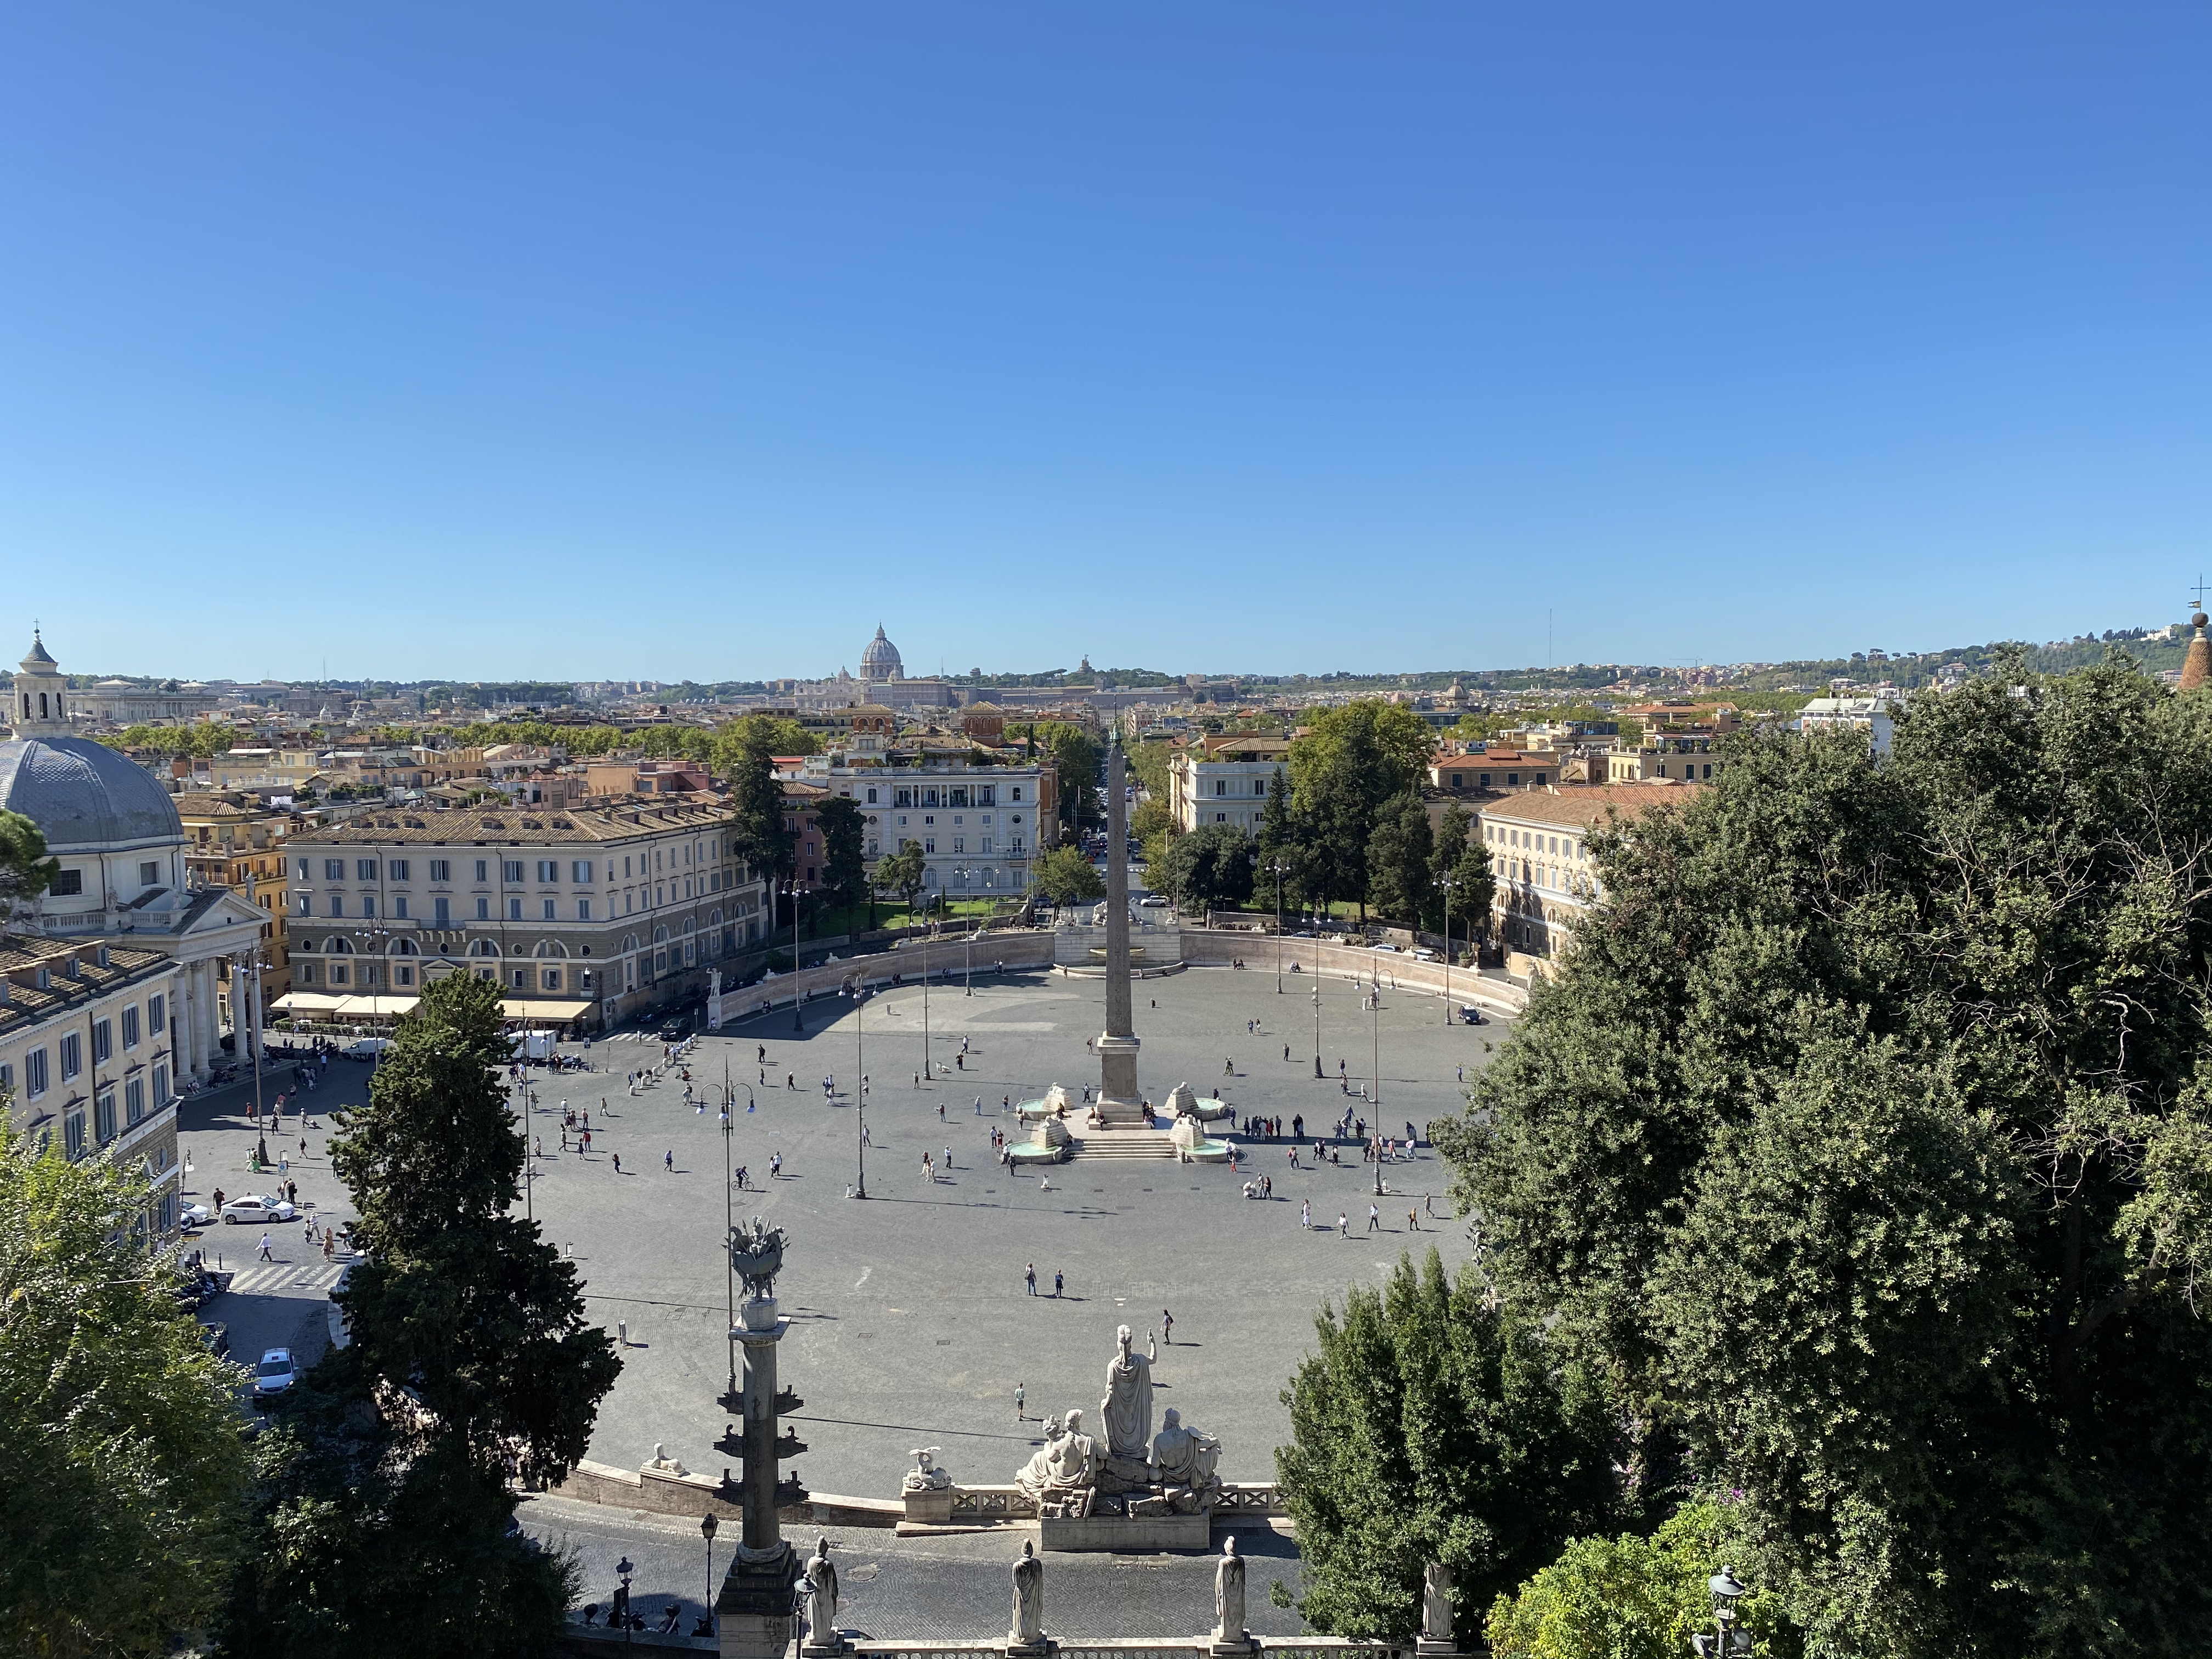 Piazza del Popolo as seen from the Pincian Hill, wide camera. (St. Peter's Basilica in the background.)